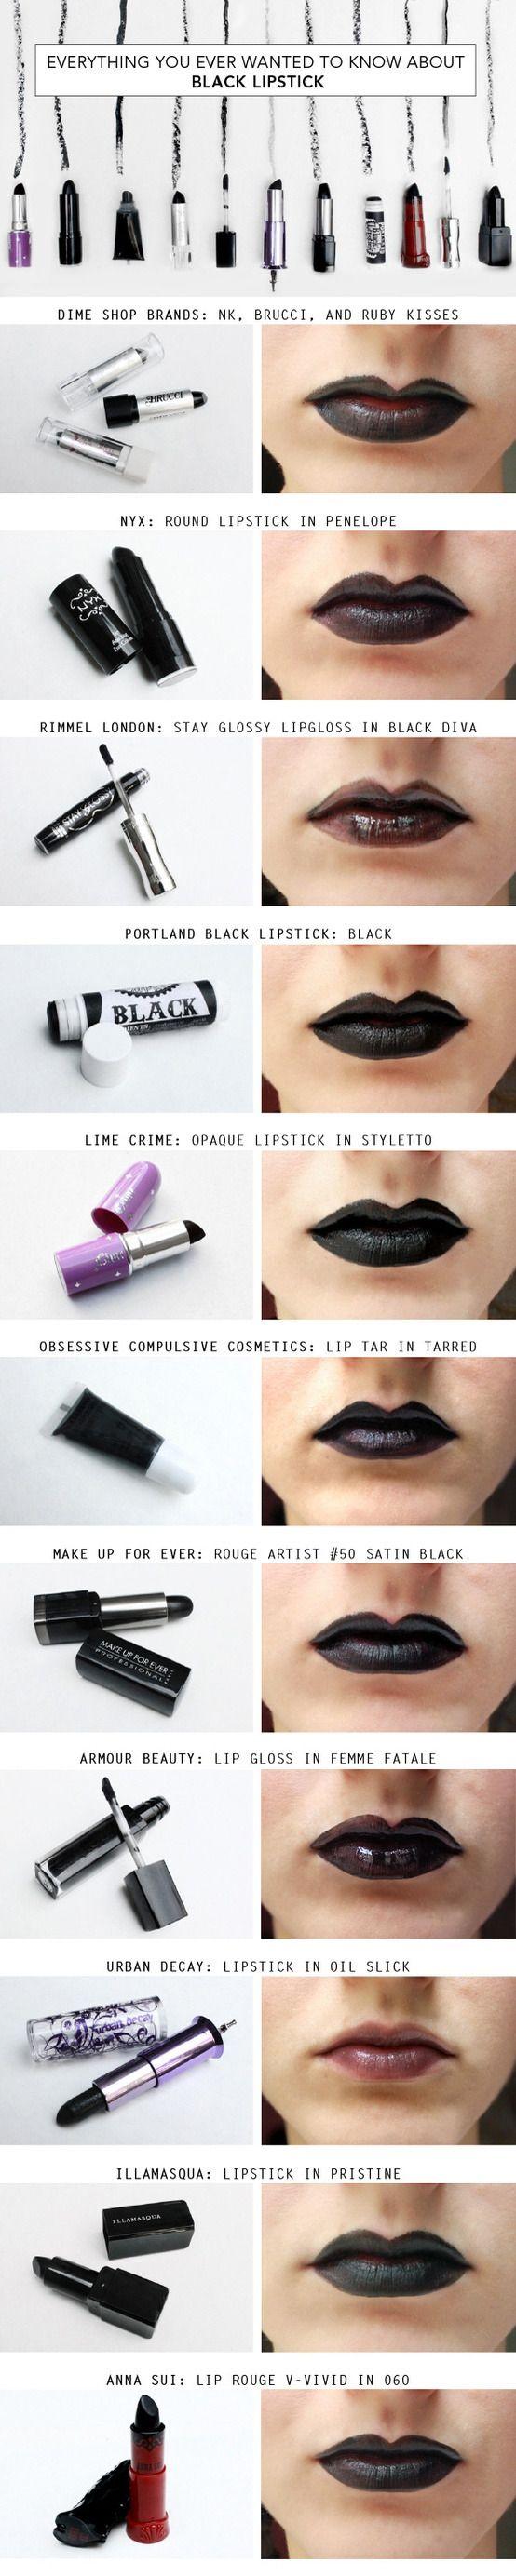 Wedding - Black Lipstick: The Best Color You’ve Probably Never Tried!